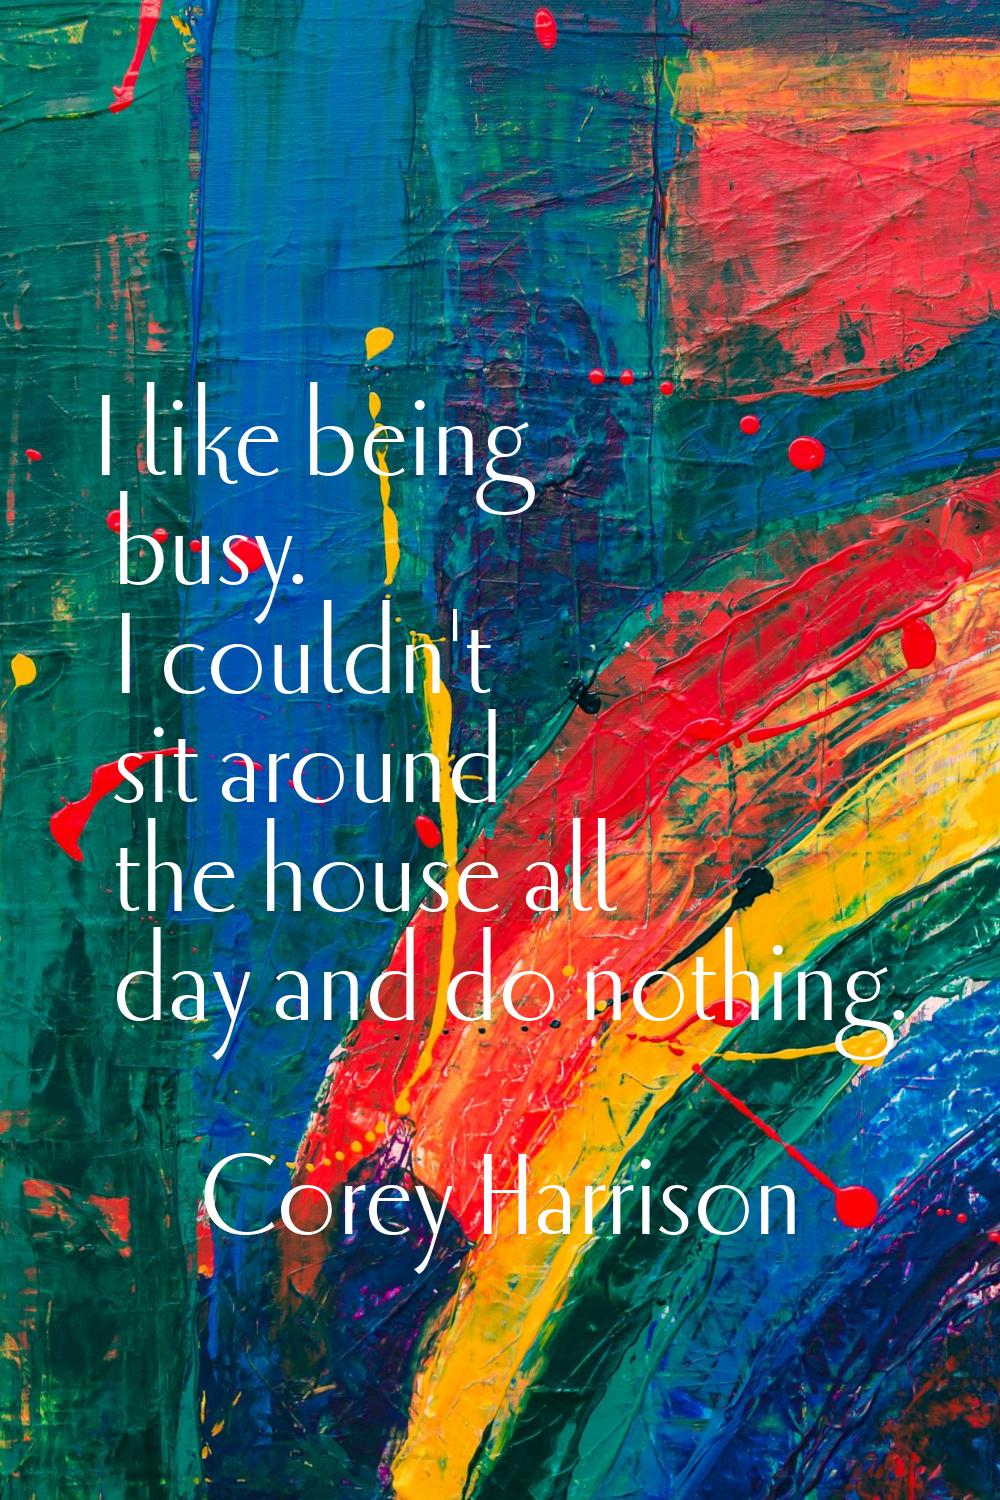 I like being busy. I couldn't sit around the house all day and do nothing.